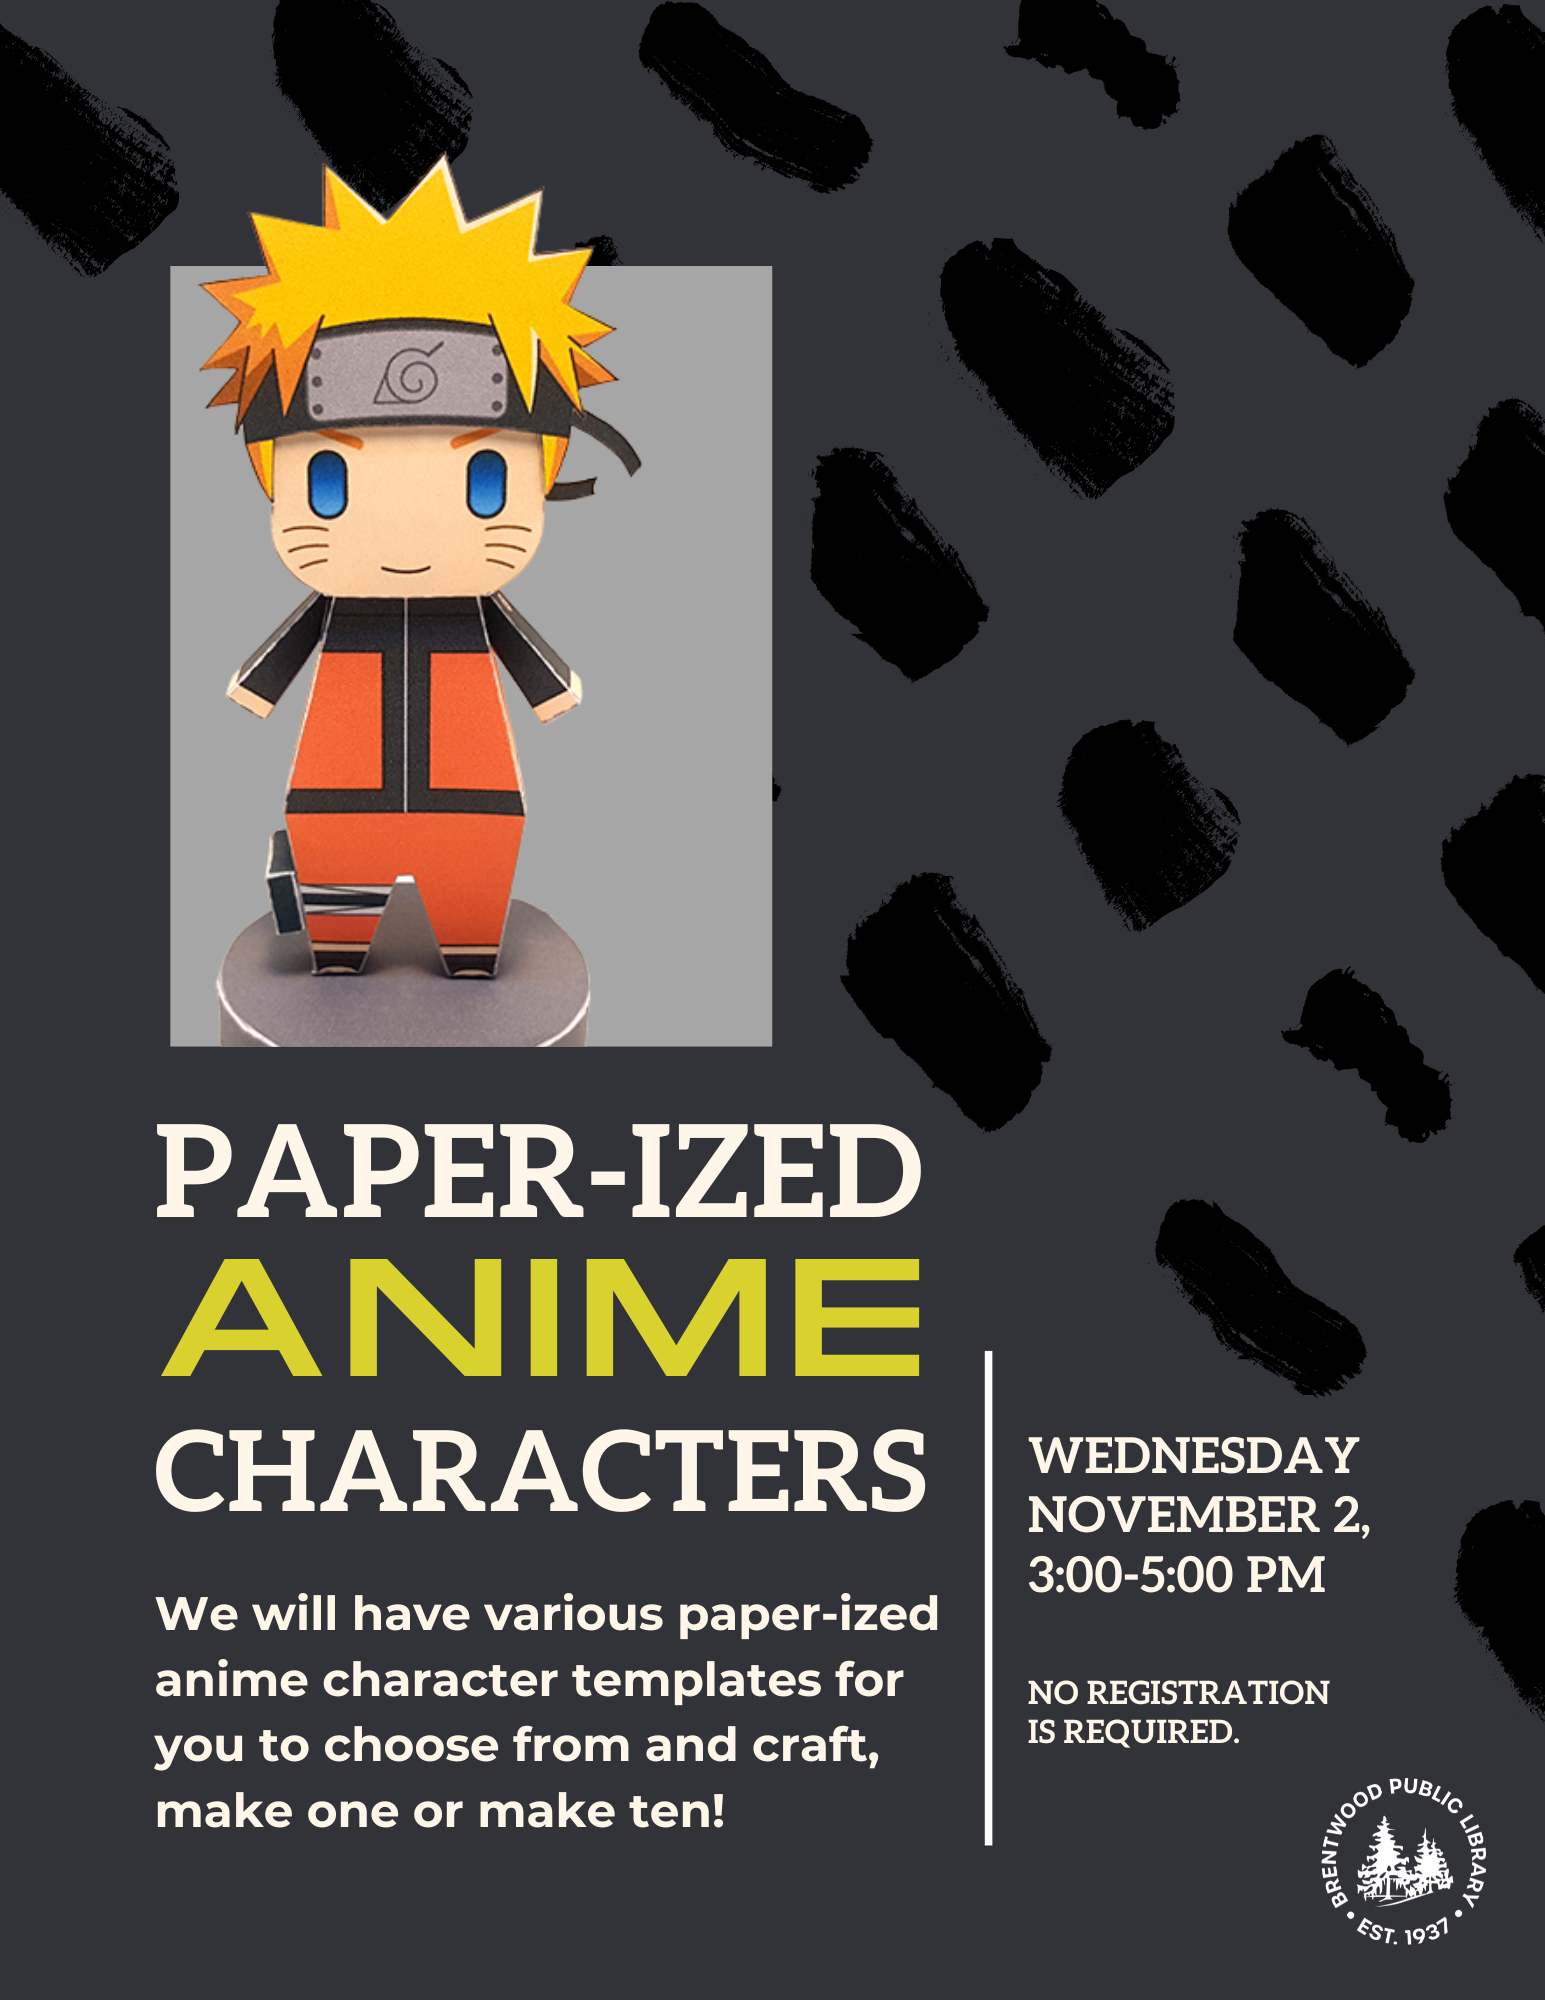 Paper-ized Anime Characters 